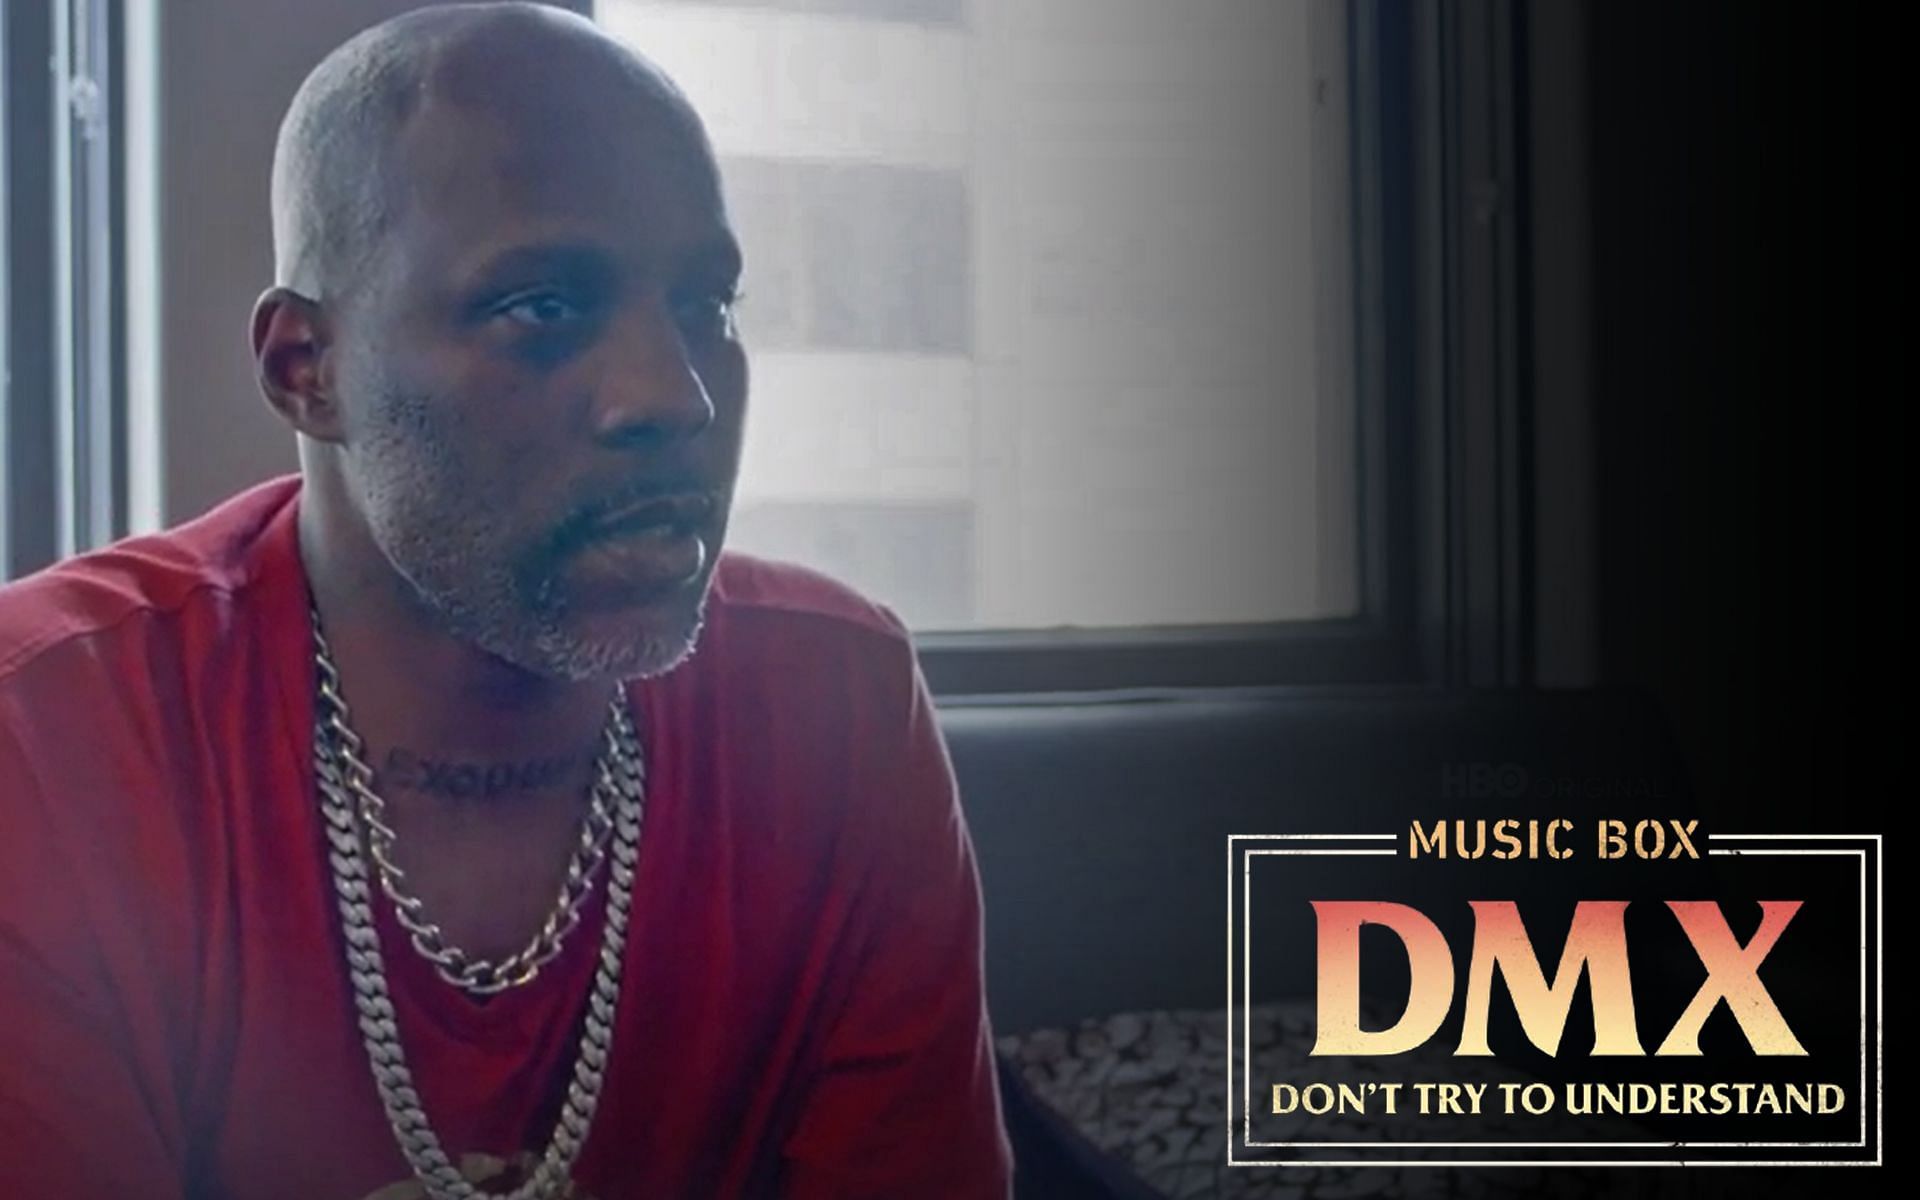 DMX, the Legendary Yet Troubled Rap Icon, Has Died